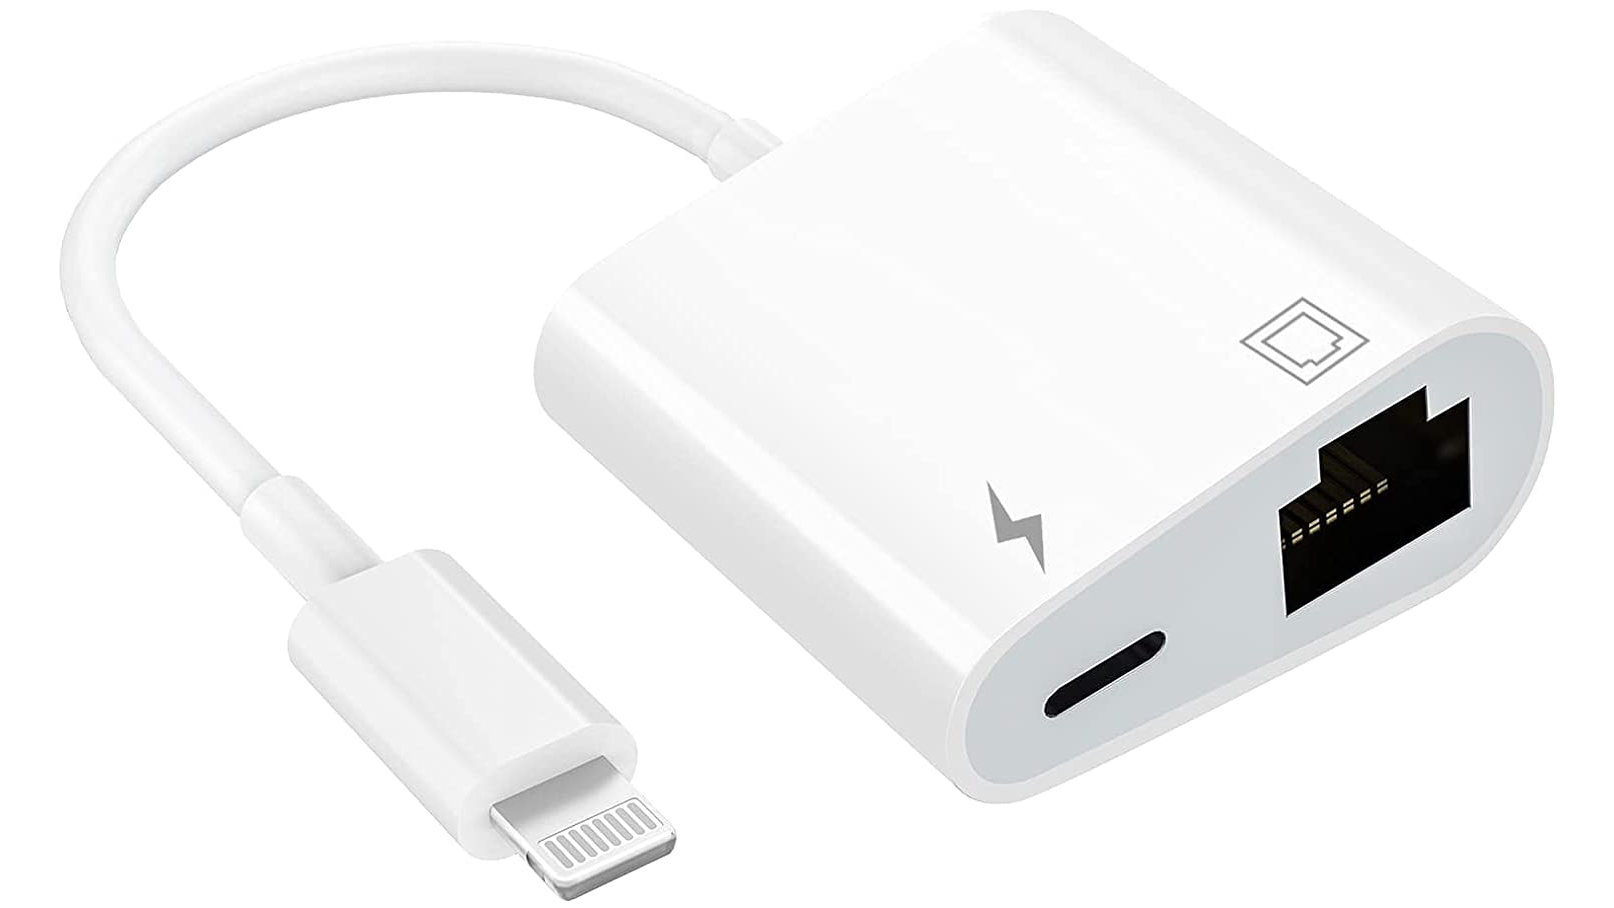 Desoficon Lightning to Ethernet Adapter - iPhone dongles